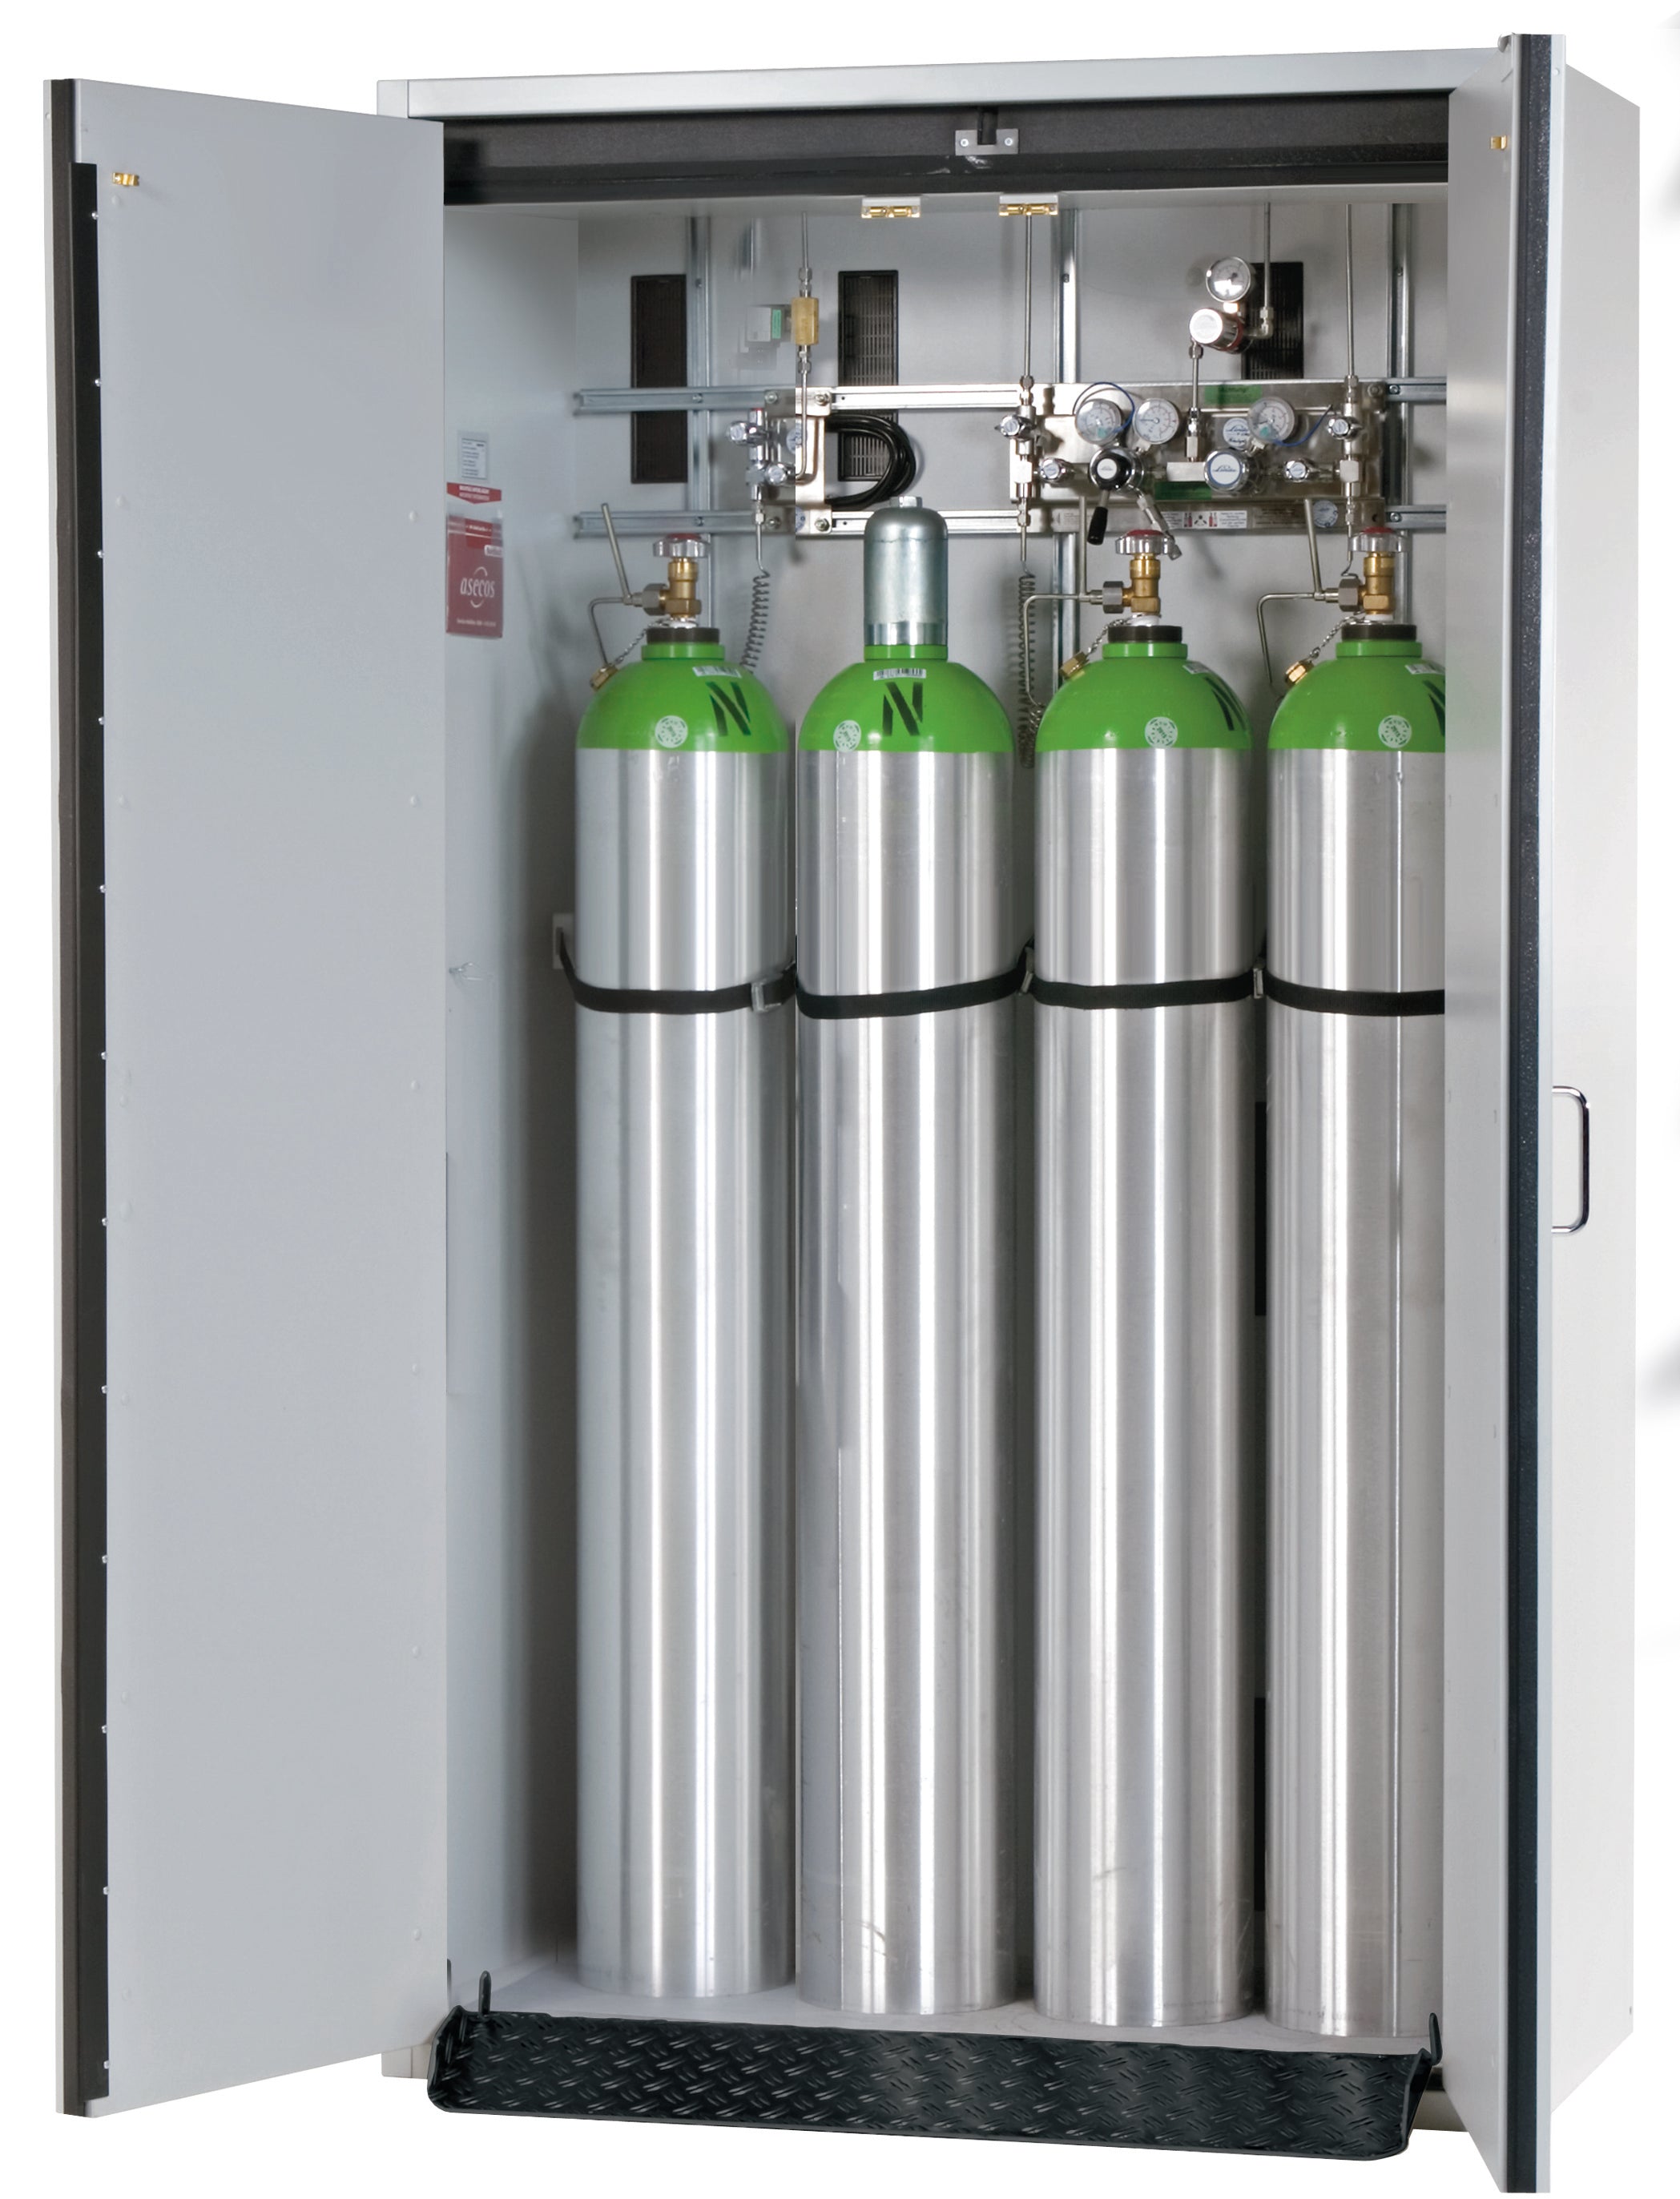 Type 30 compressed gas bottle cabinet G-CLASSIC-30 model G30.205.120 in light gray RAL 7035 with standard interior fittings for 4x compressed gas bottles of 50 liters each